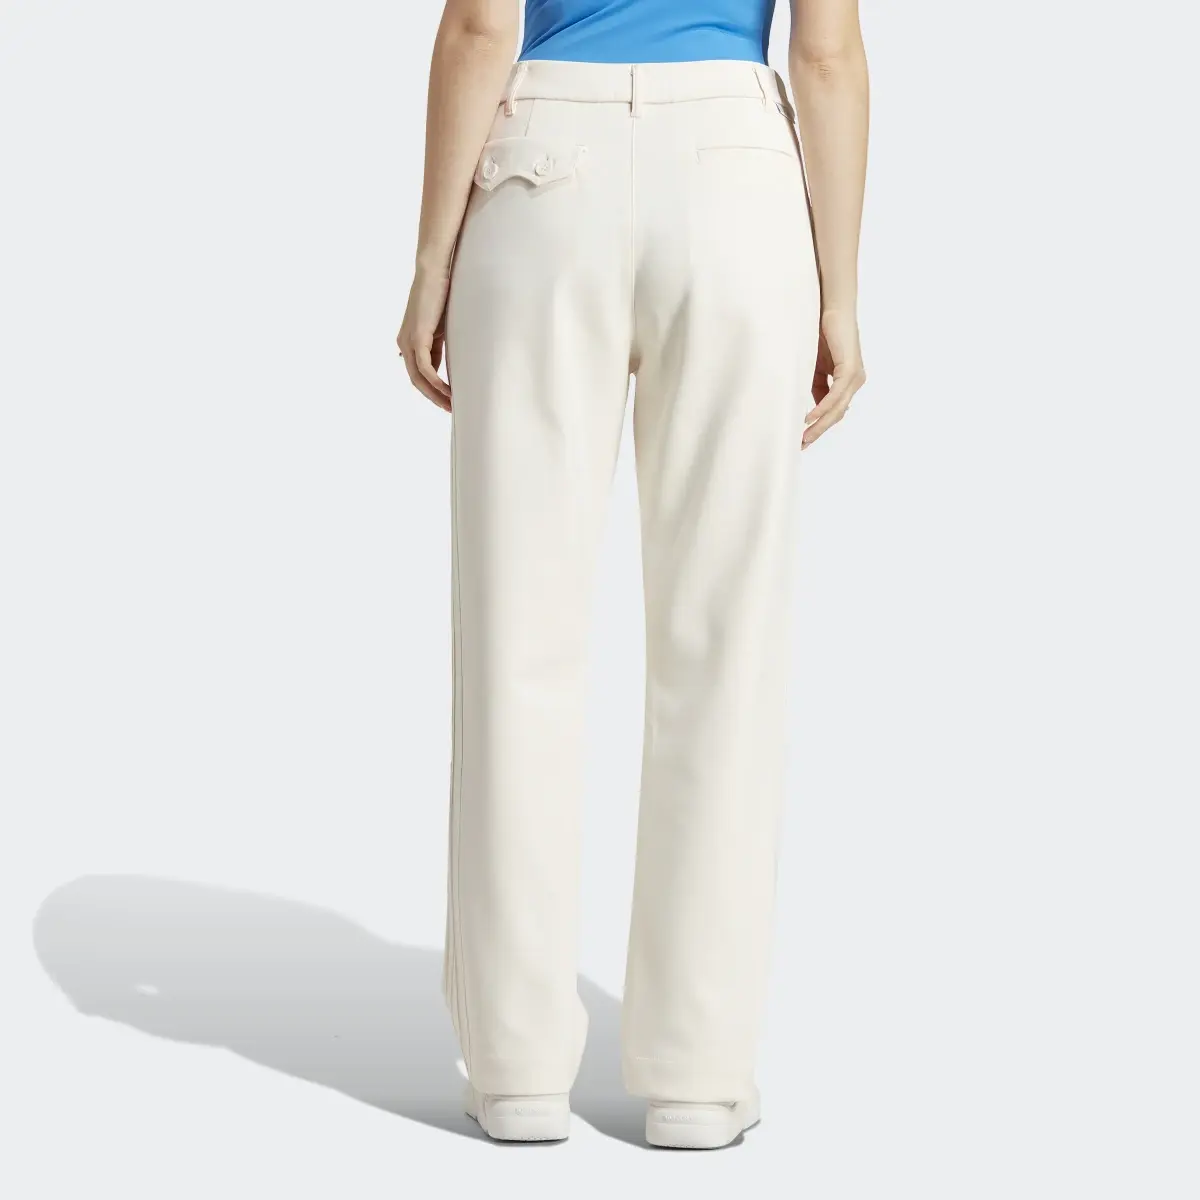 Adidas Blue Version Club High-Waisted Tracksuit Bottoms. 2